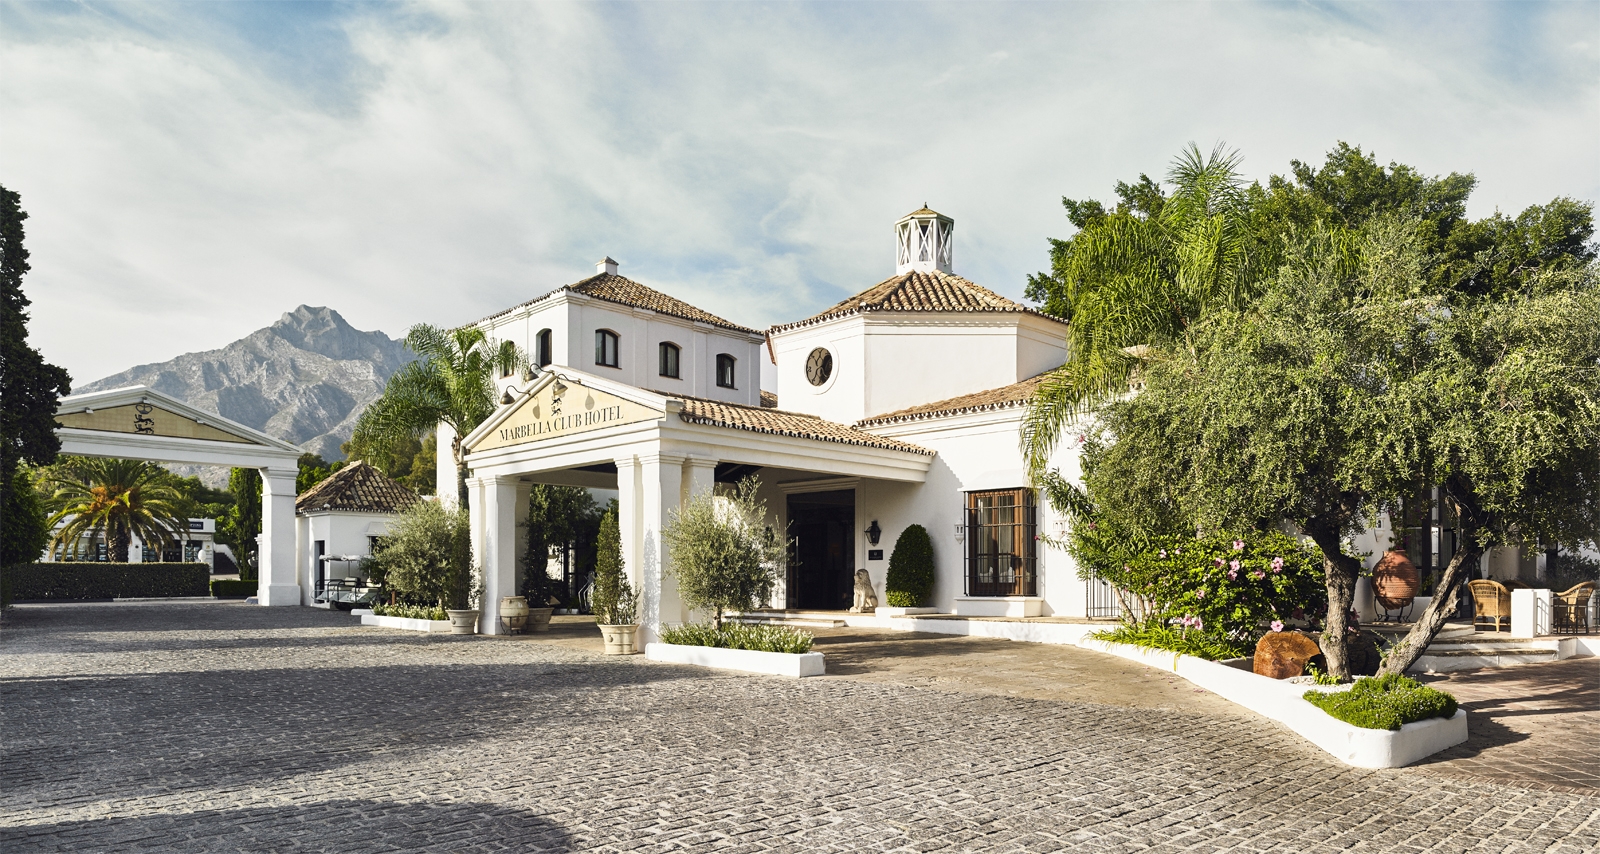 Exterior of the entrance to luxury resort Marbella Club in Spain